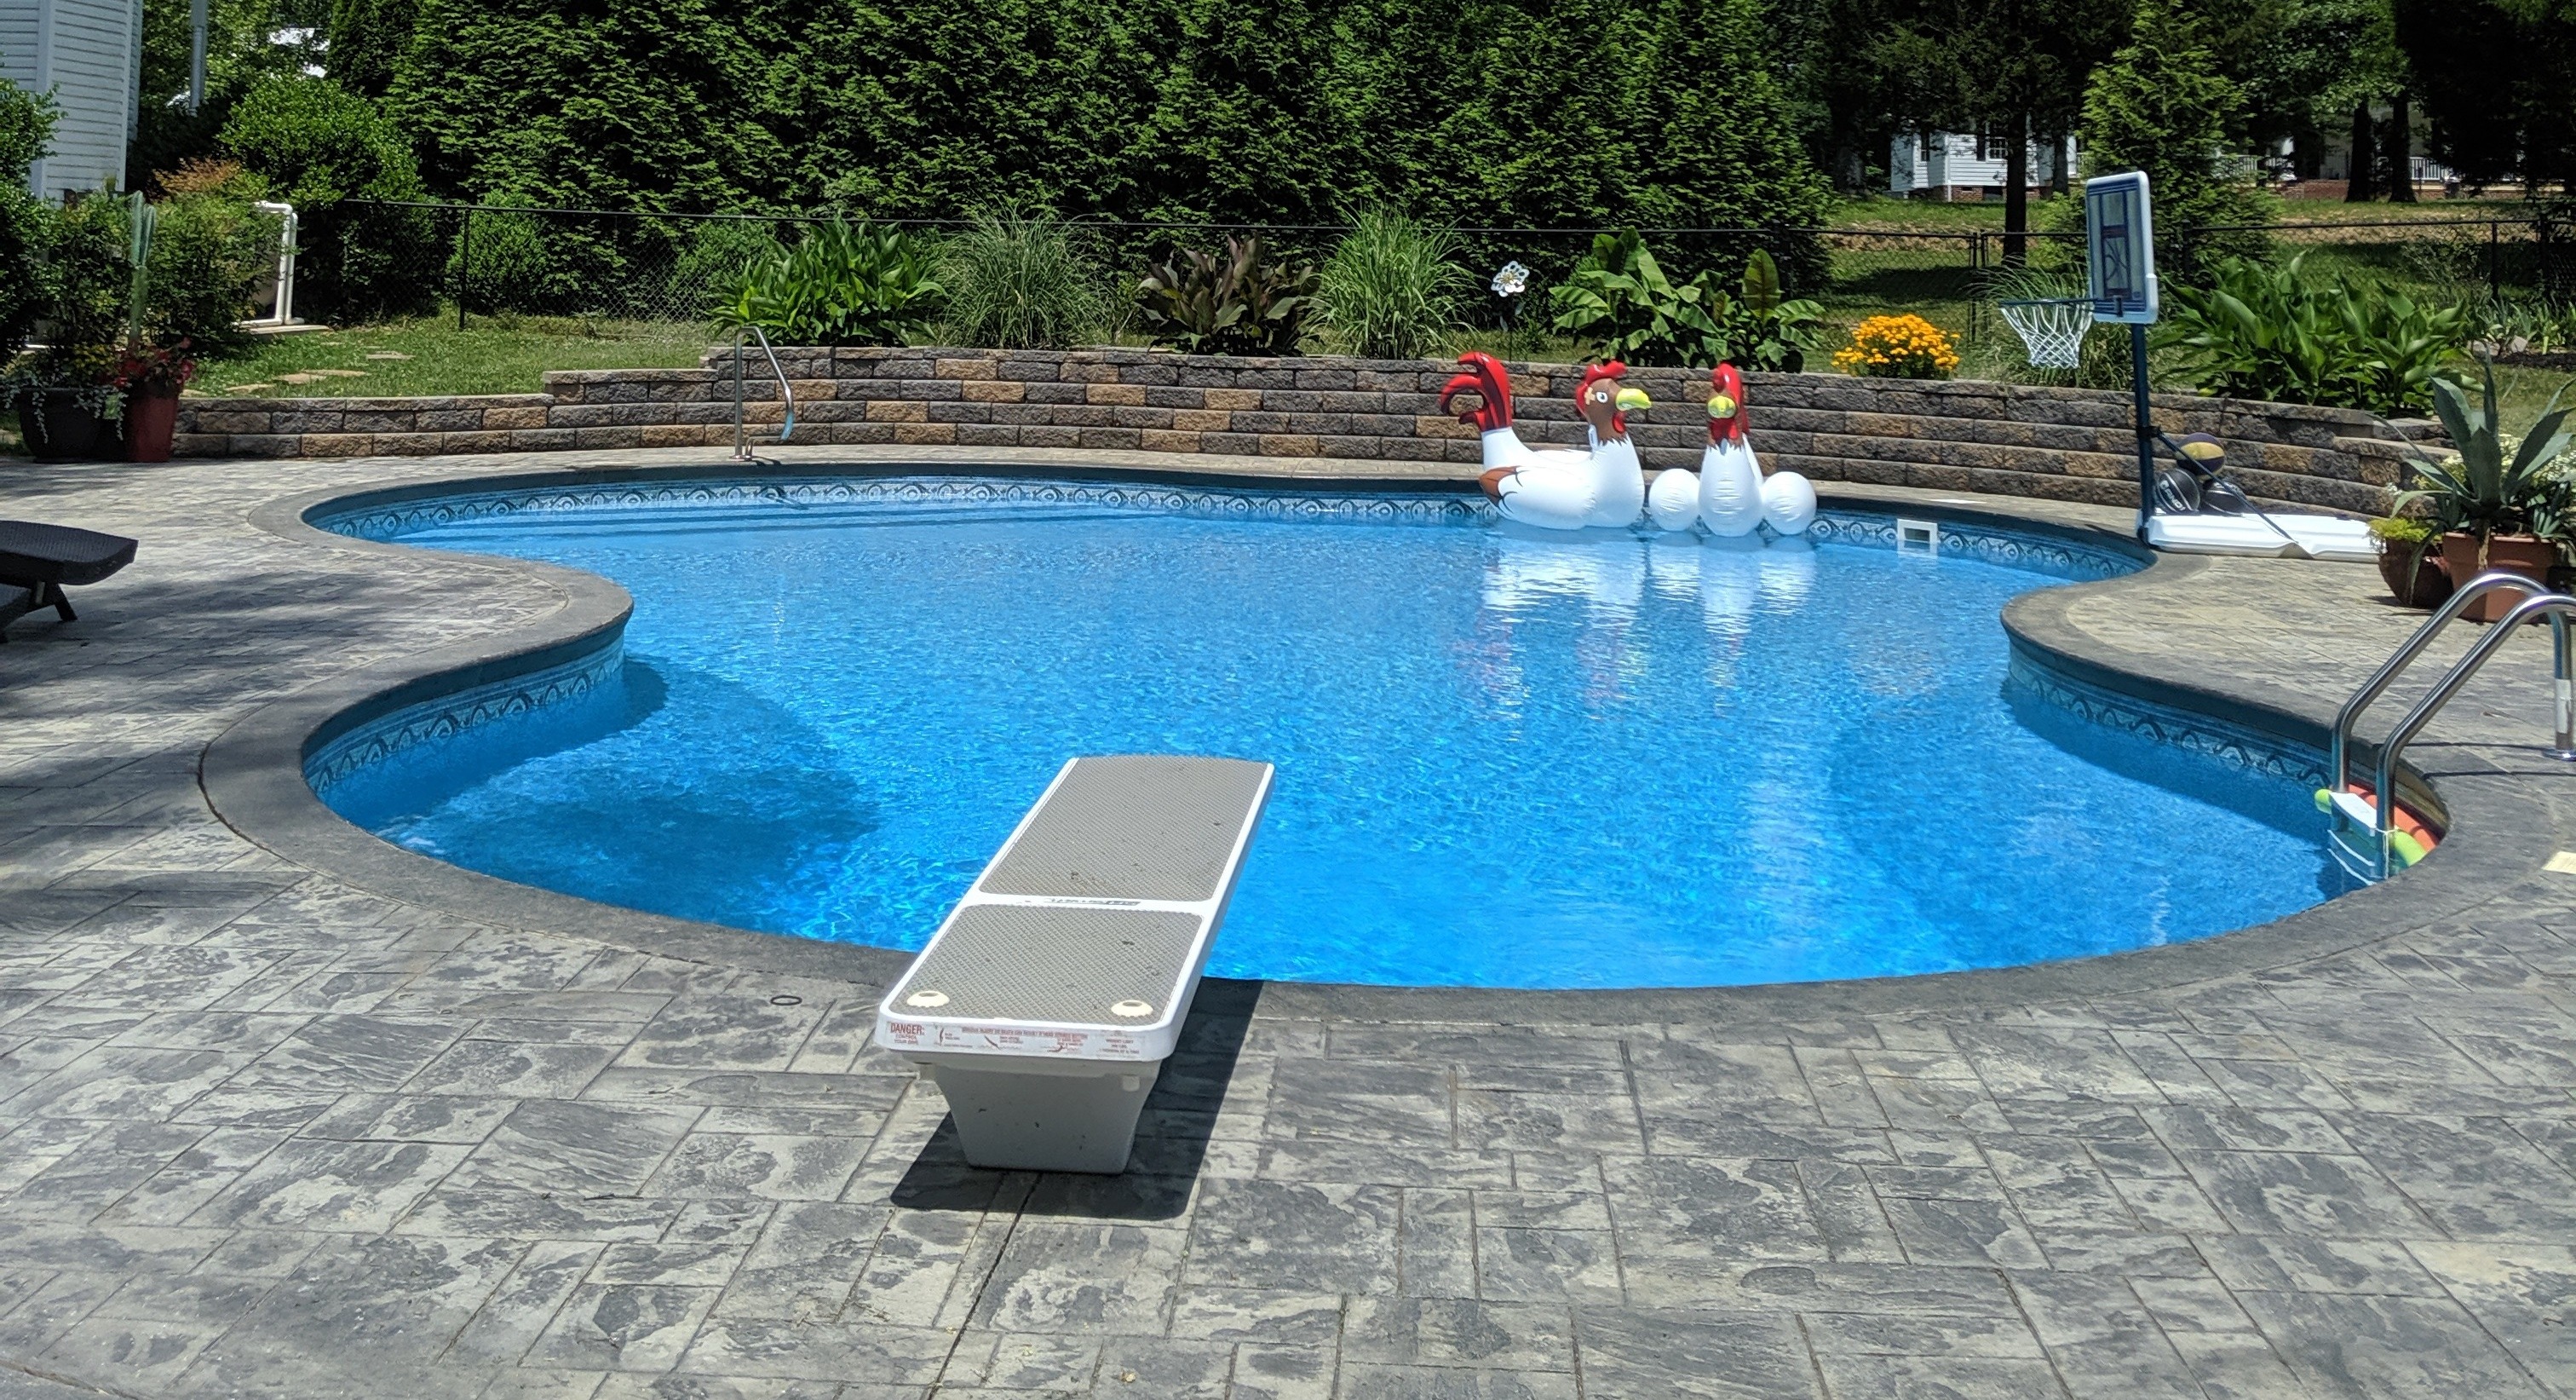 How To Safely Design A Diving Board Pool, Inground Pool Diving Board Parts